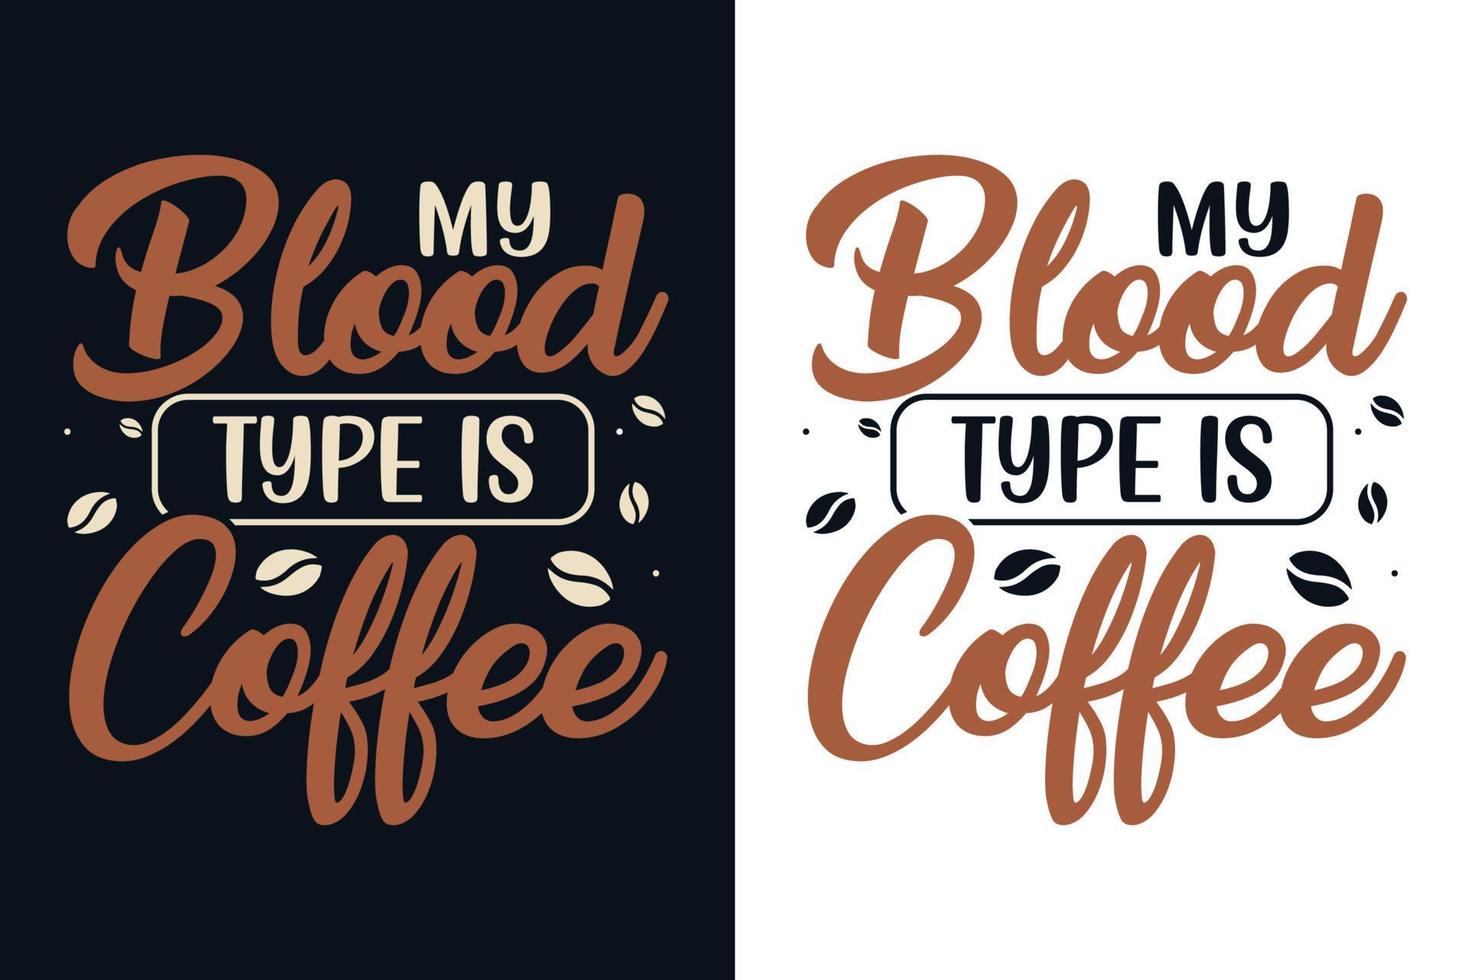 My blood type is coffee typography lettering design for t shirt, poster, mug, bag, sticker and merchandise vector